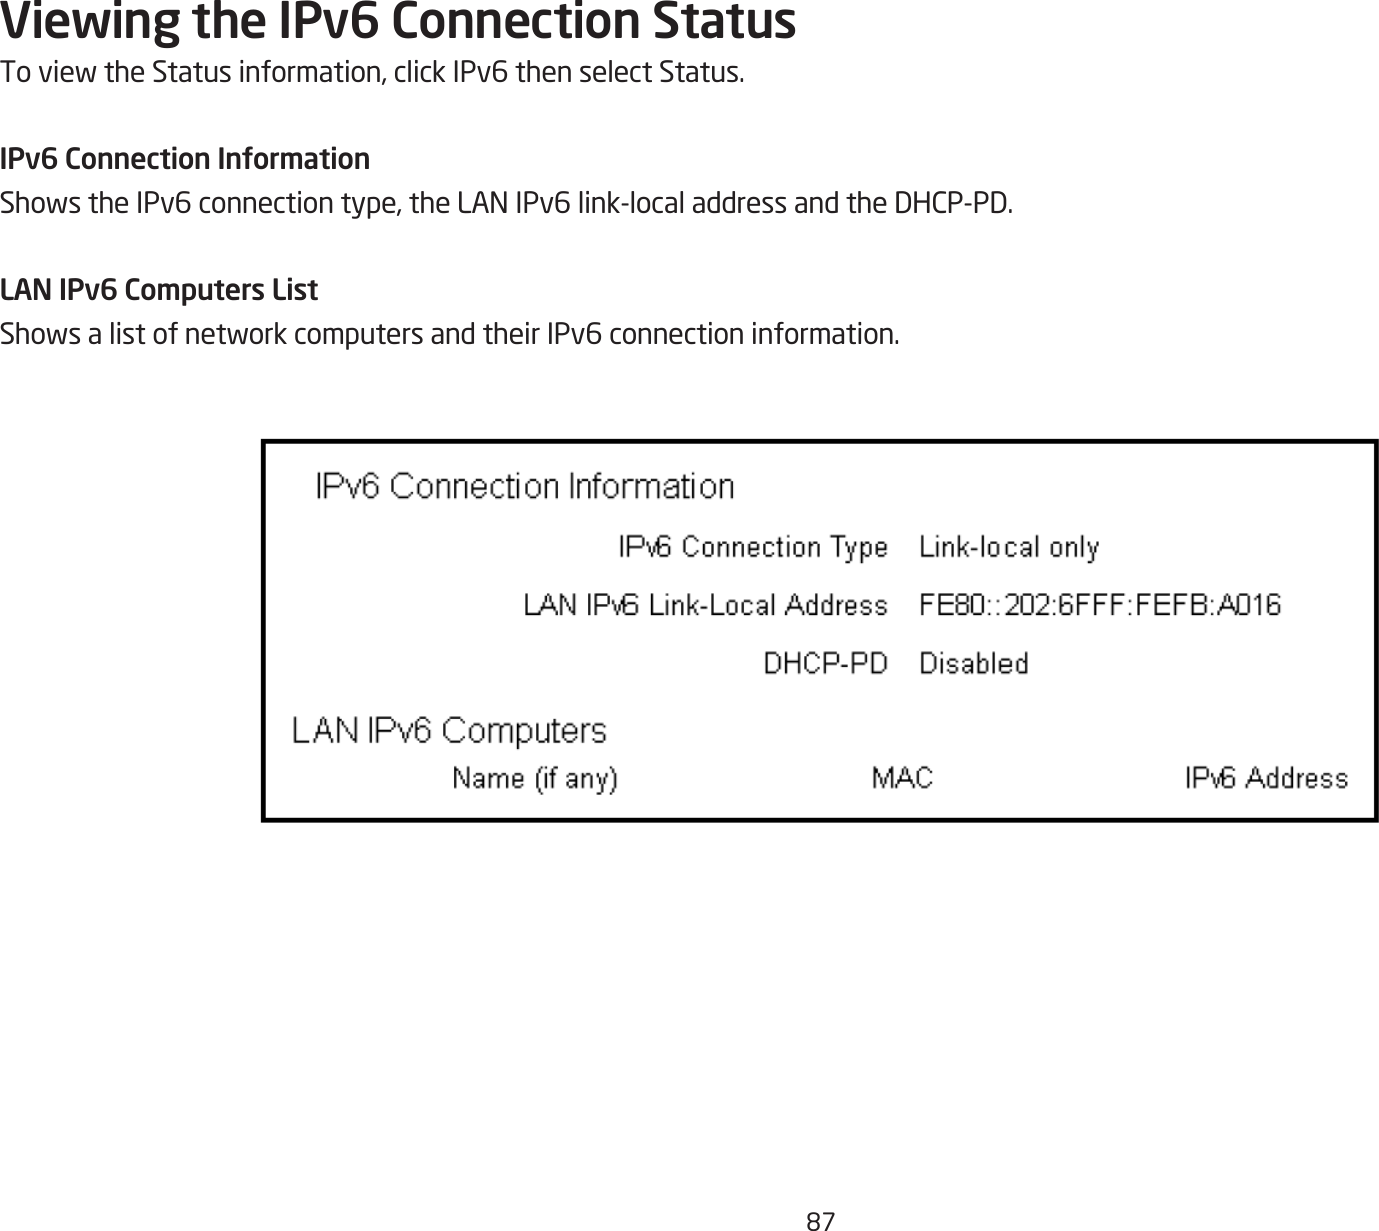 87Viewing the IPv6 Connection StatusToviewtheStatusinformation,clickIPv6thenselectStatus.IPv6 Connection InformationShowstheIPv6connectiontype,theLANIPv6link-localaddressandtheDHCP-PD.LAN IPv6 Computers ListShowsalistofnetworkcomputersandtheirIPv6connectioninformation.